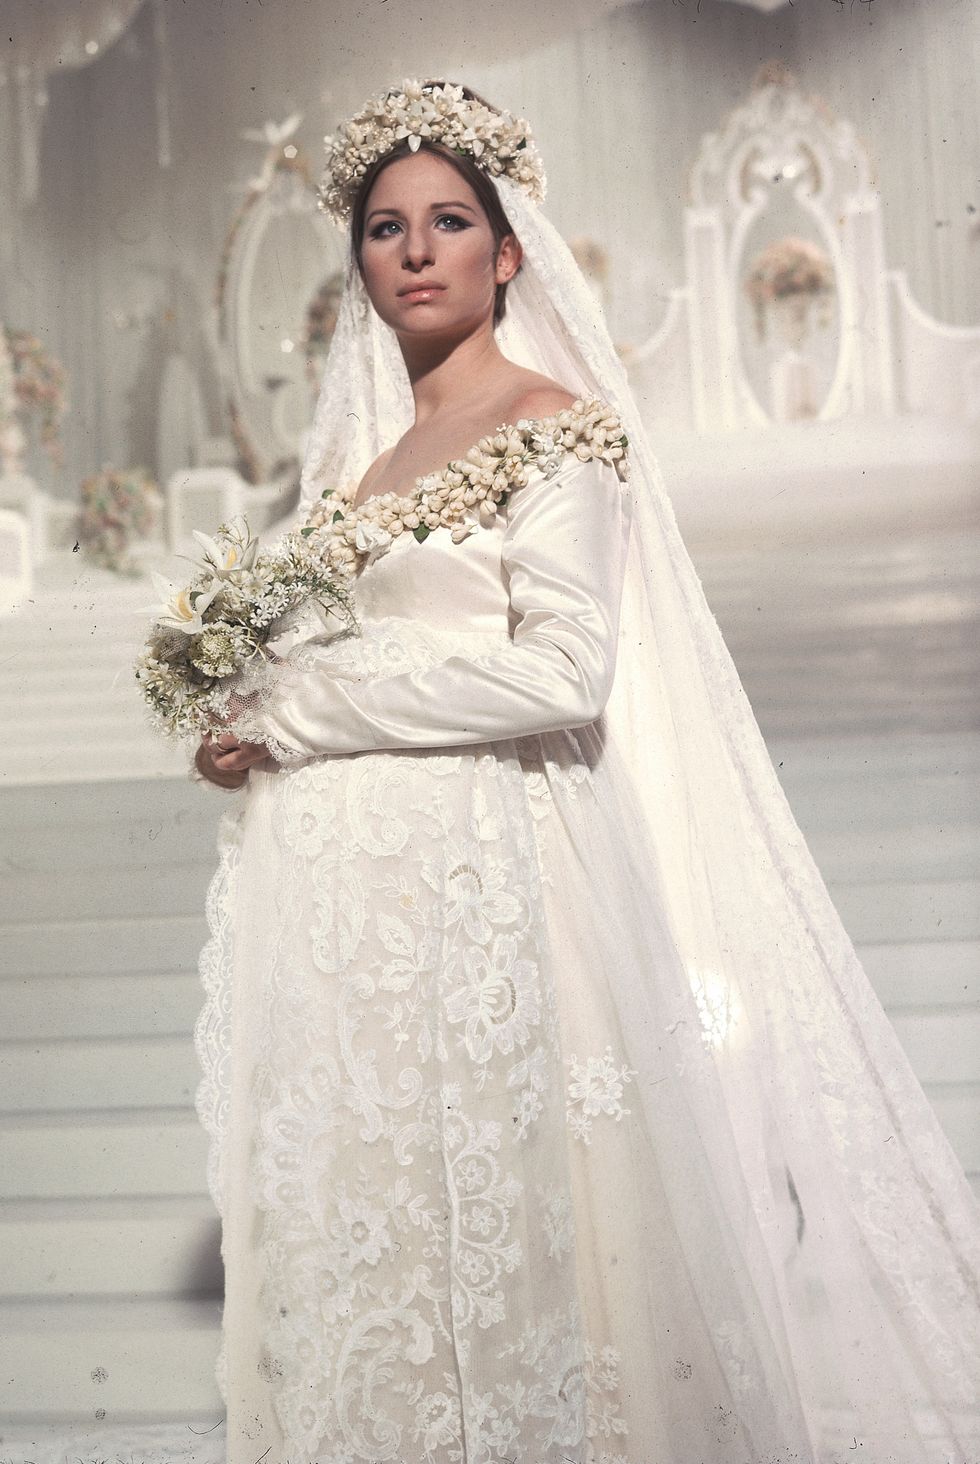 The Most Popular Wedding Dresses the Year You Were Born